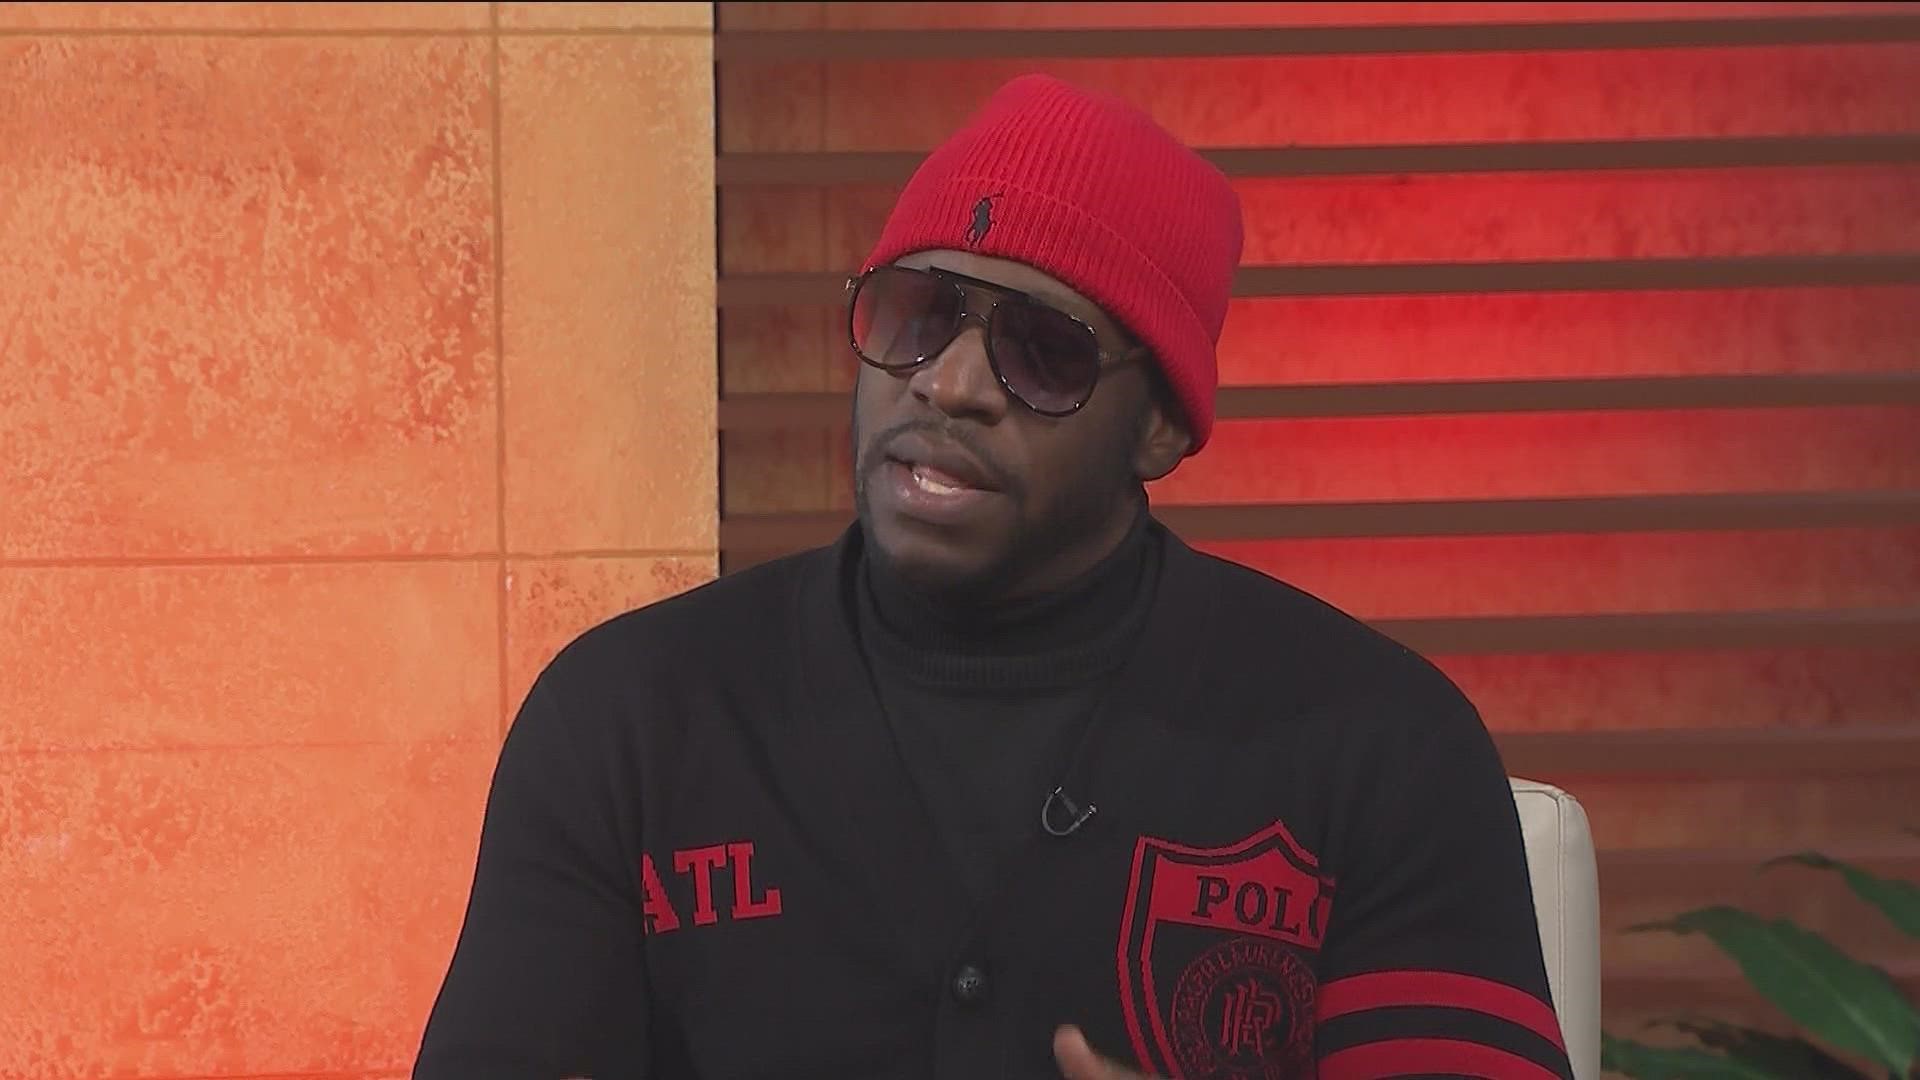 Young Dro, who grew up in Atlanta's westside, discusses why he wants to bring the initiative to the city's youth.